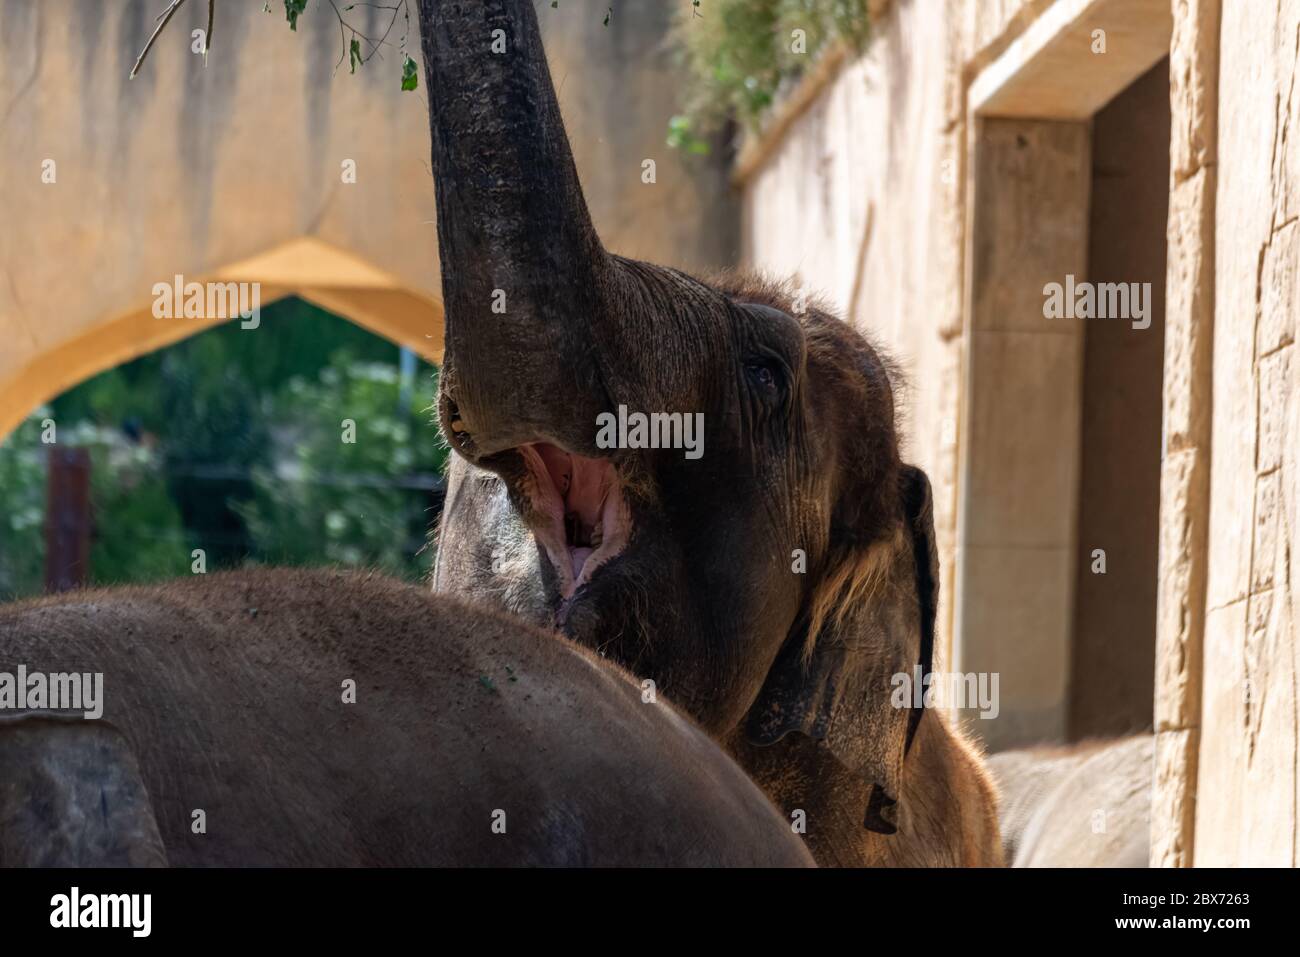 Elephant shows his mouth and raises his trunk Stock Photo